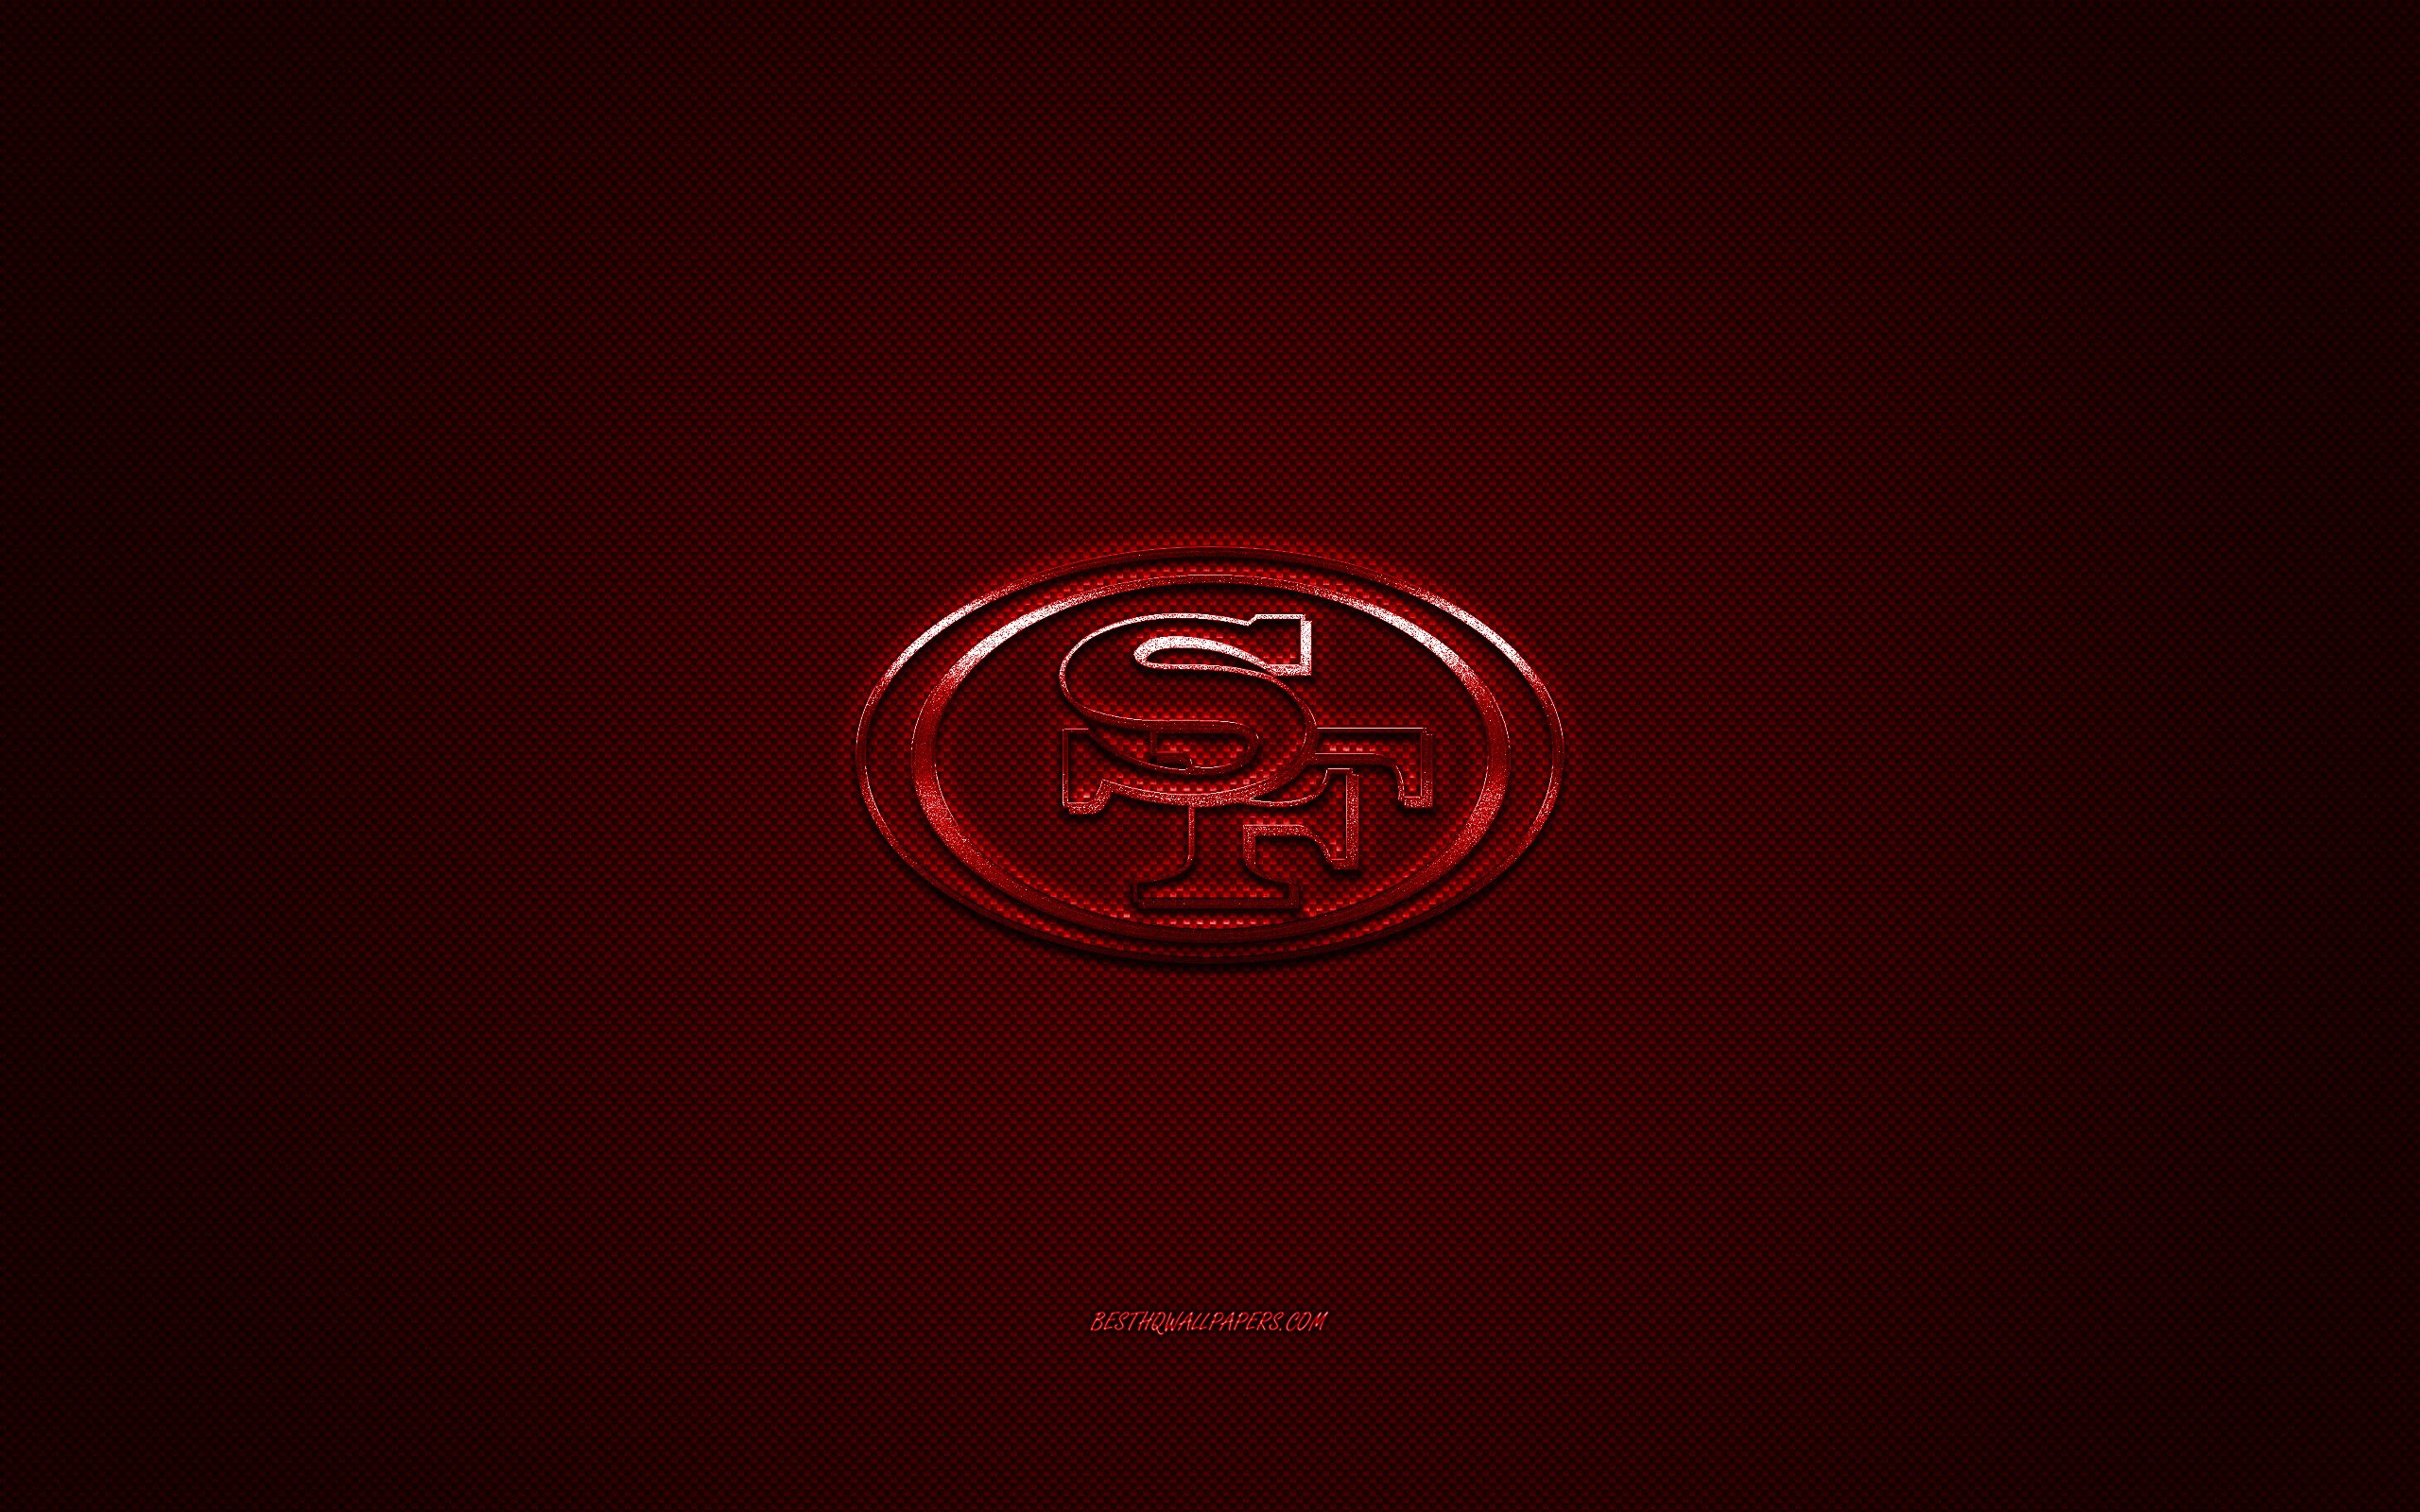 Download wallpapers San Francisco 49ers, American football club, NFL, red  logo, red carbon fiber background, american football, San Francisco,  California, USA, National Football League, San Francisco 49ers logo for  desktop with resolution